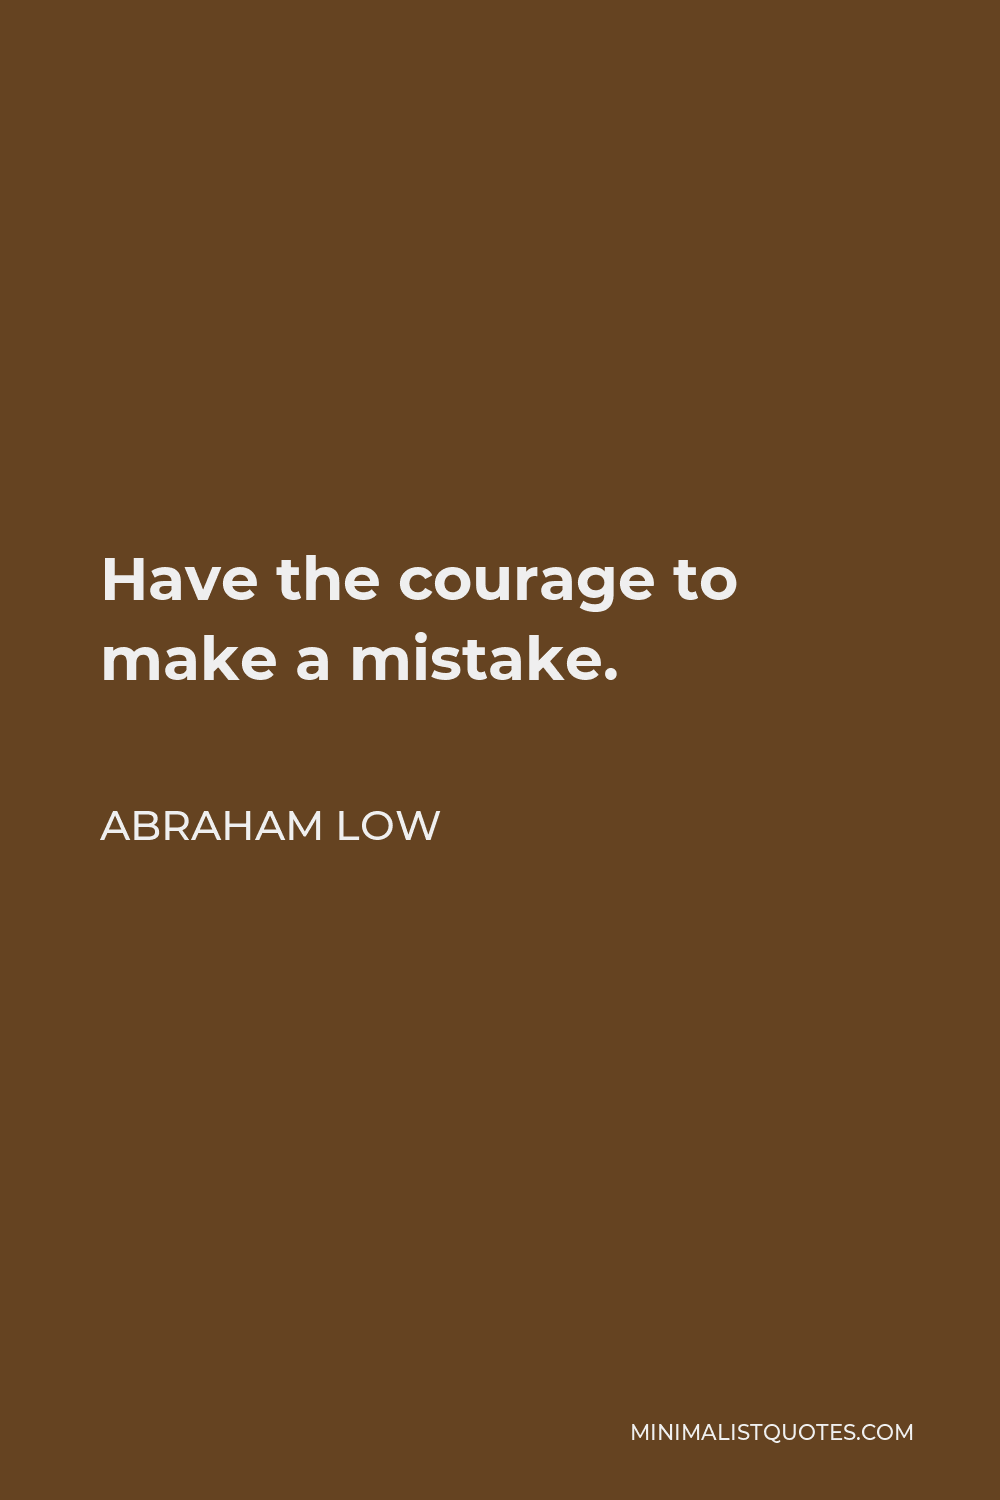 Abraham Low Quote - Have the courage to make a mistake.